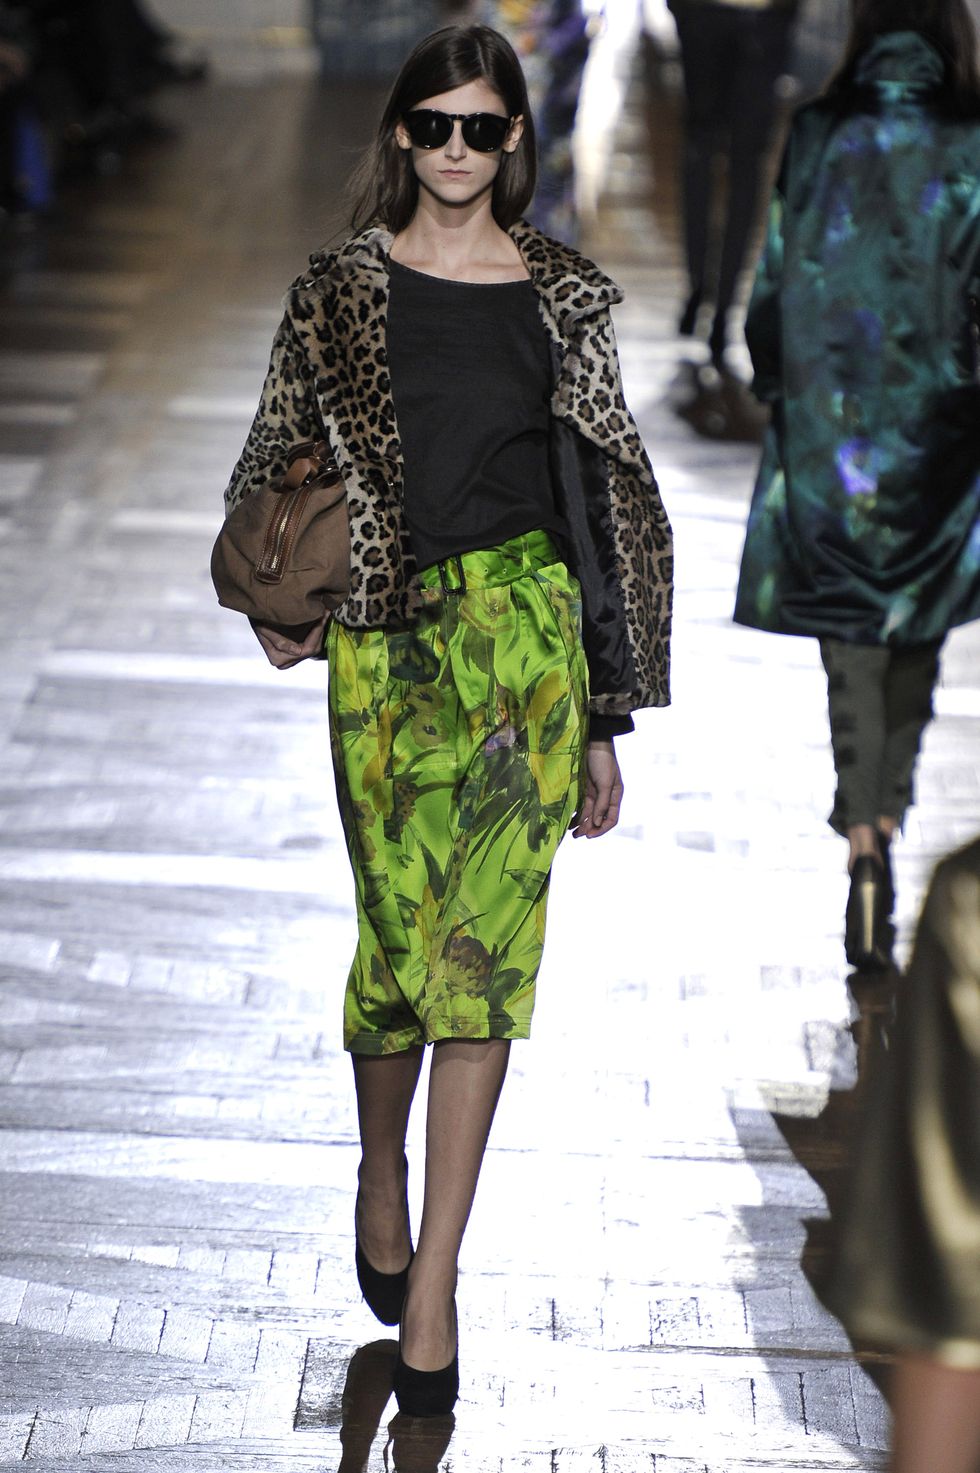 paris march 03 uk out a model walks down the runway during the dries van noten fashion show, part of paris fashion week, on march 3, 2010 in paris, france photo by chris moorecatwalkinggetty images